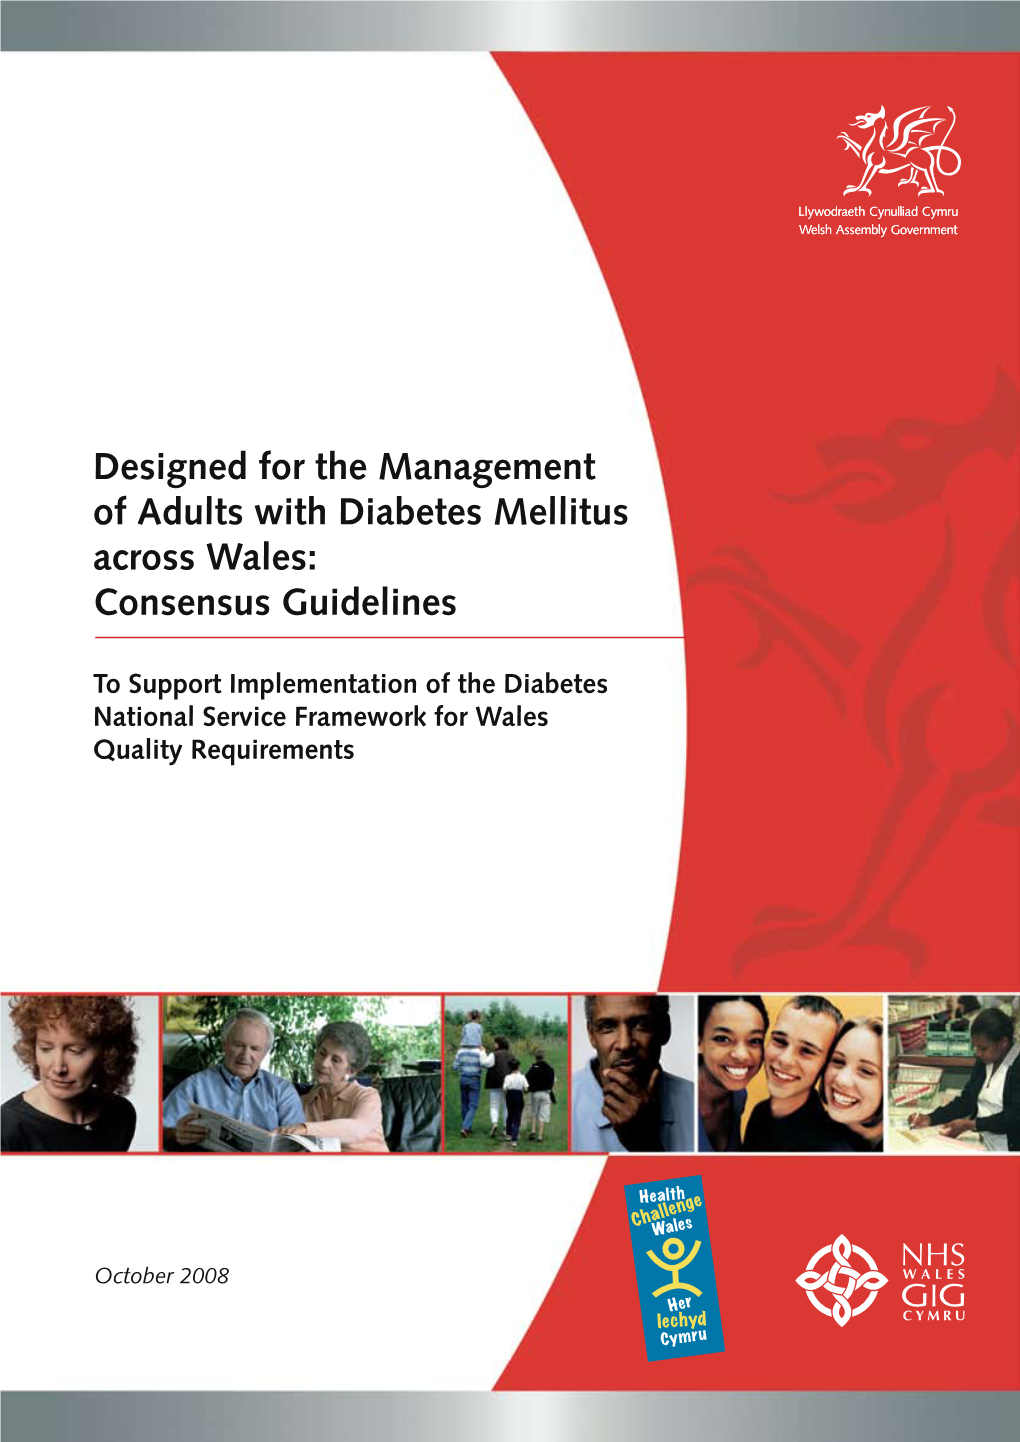 Designed for the Management of Adults with Diabetes Mellitus Across Wales: Consensus Guidelines